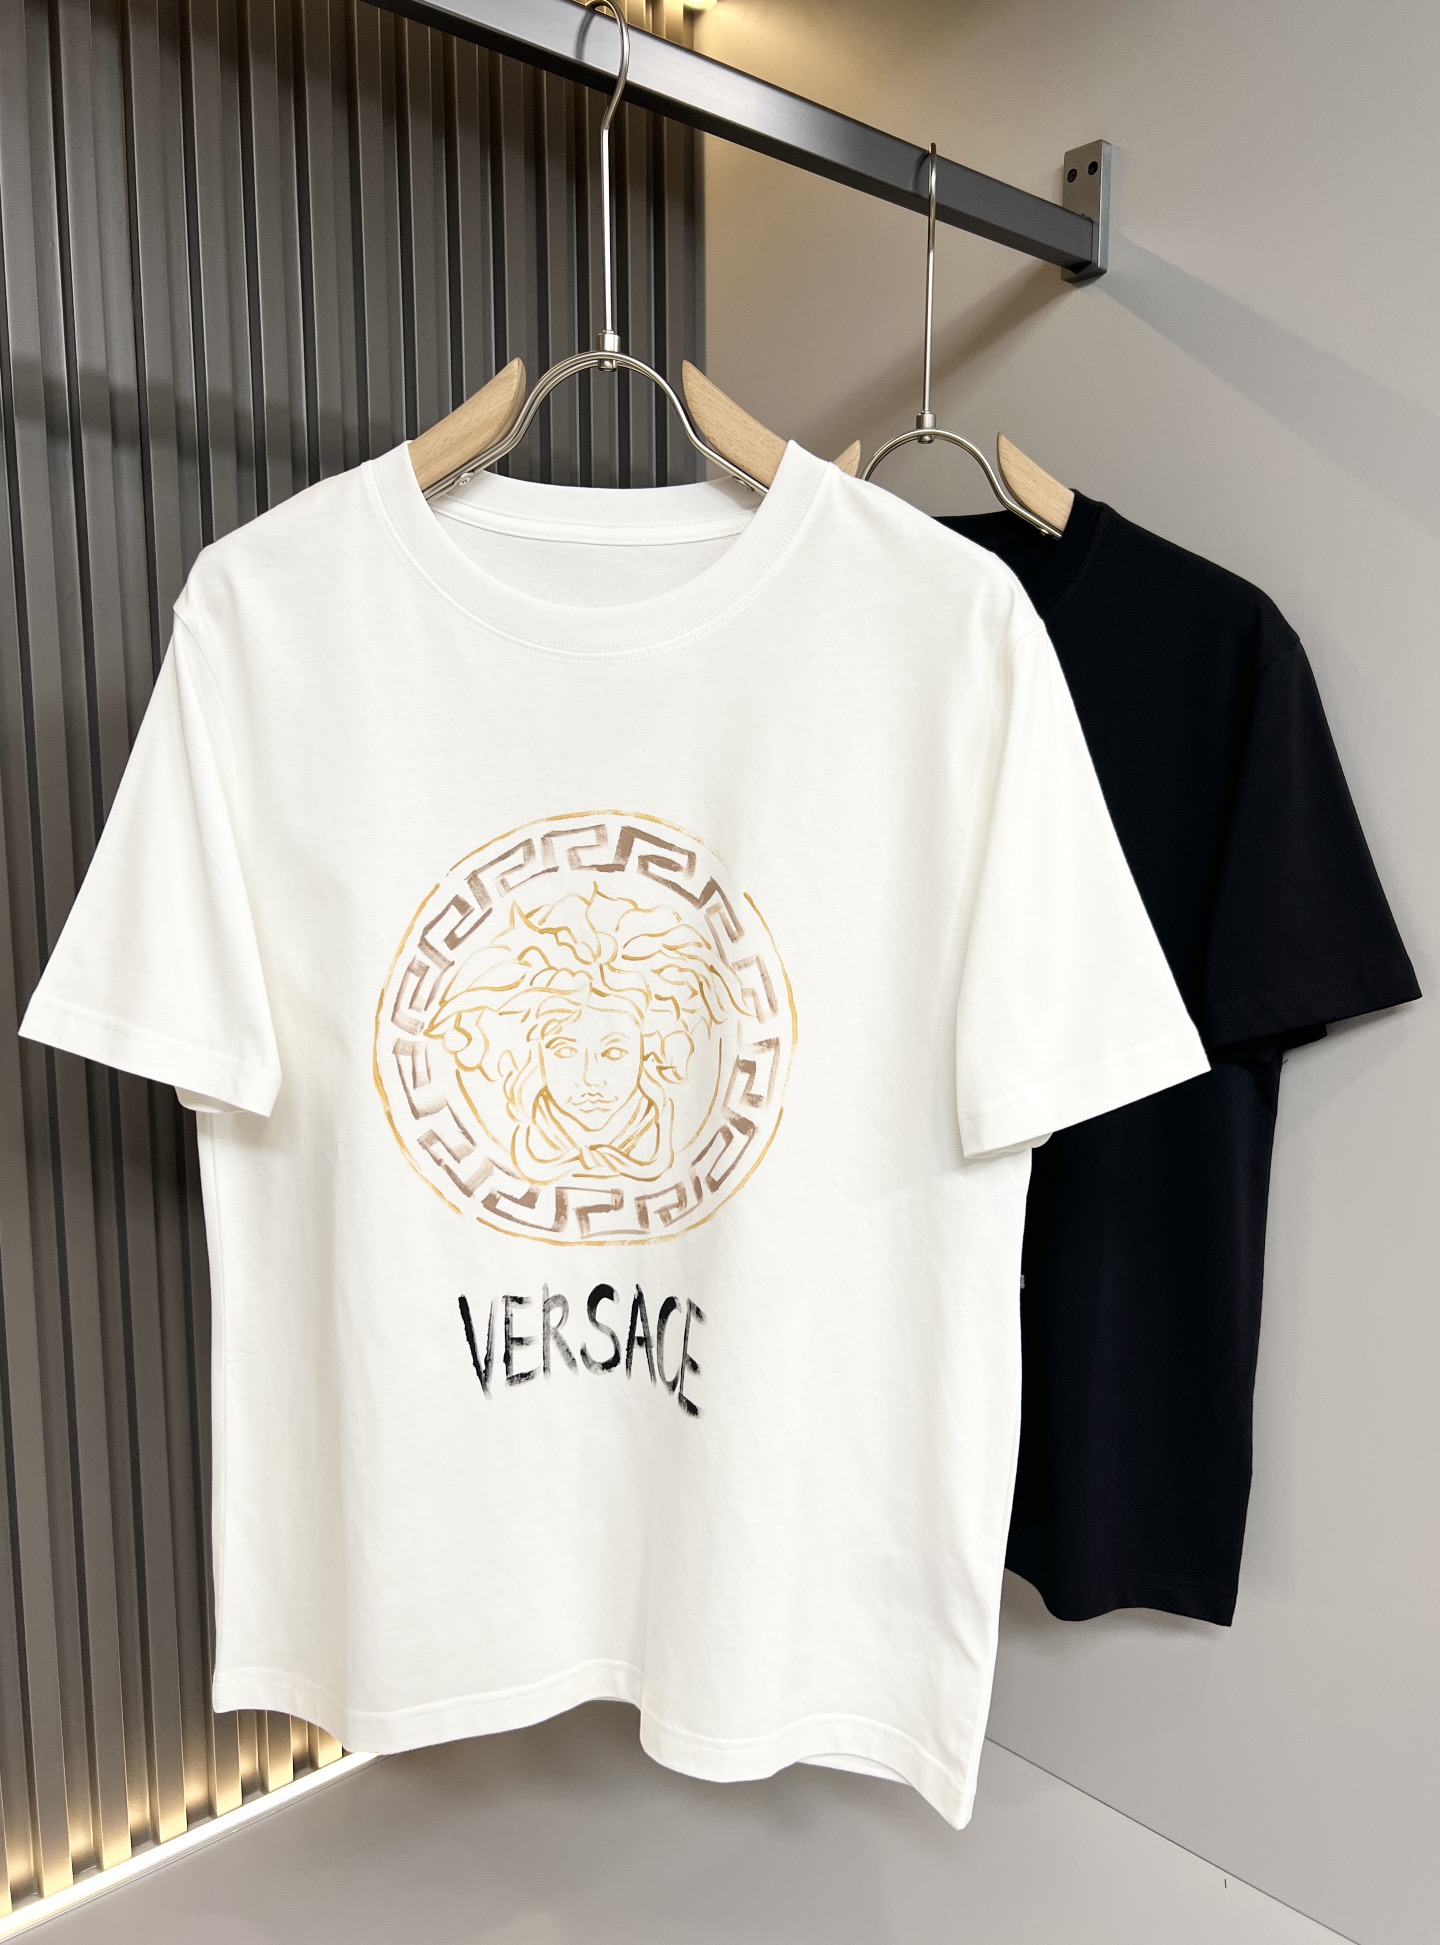 Versace Clothing T-Shirt Embroidery Cotton Spring/Summer Collection Short Sleeve